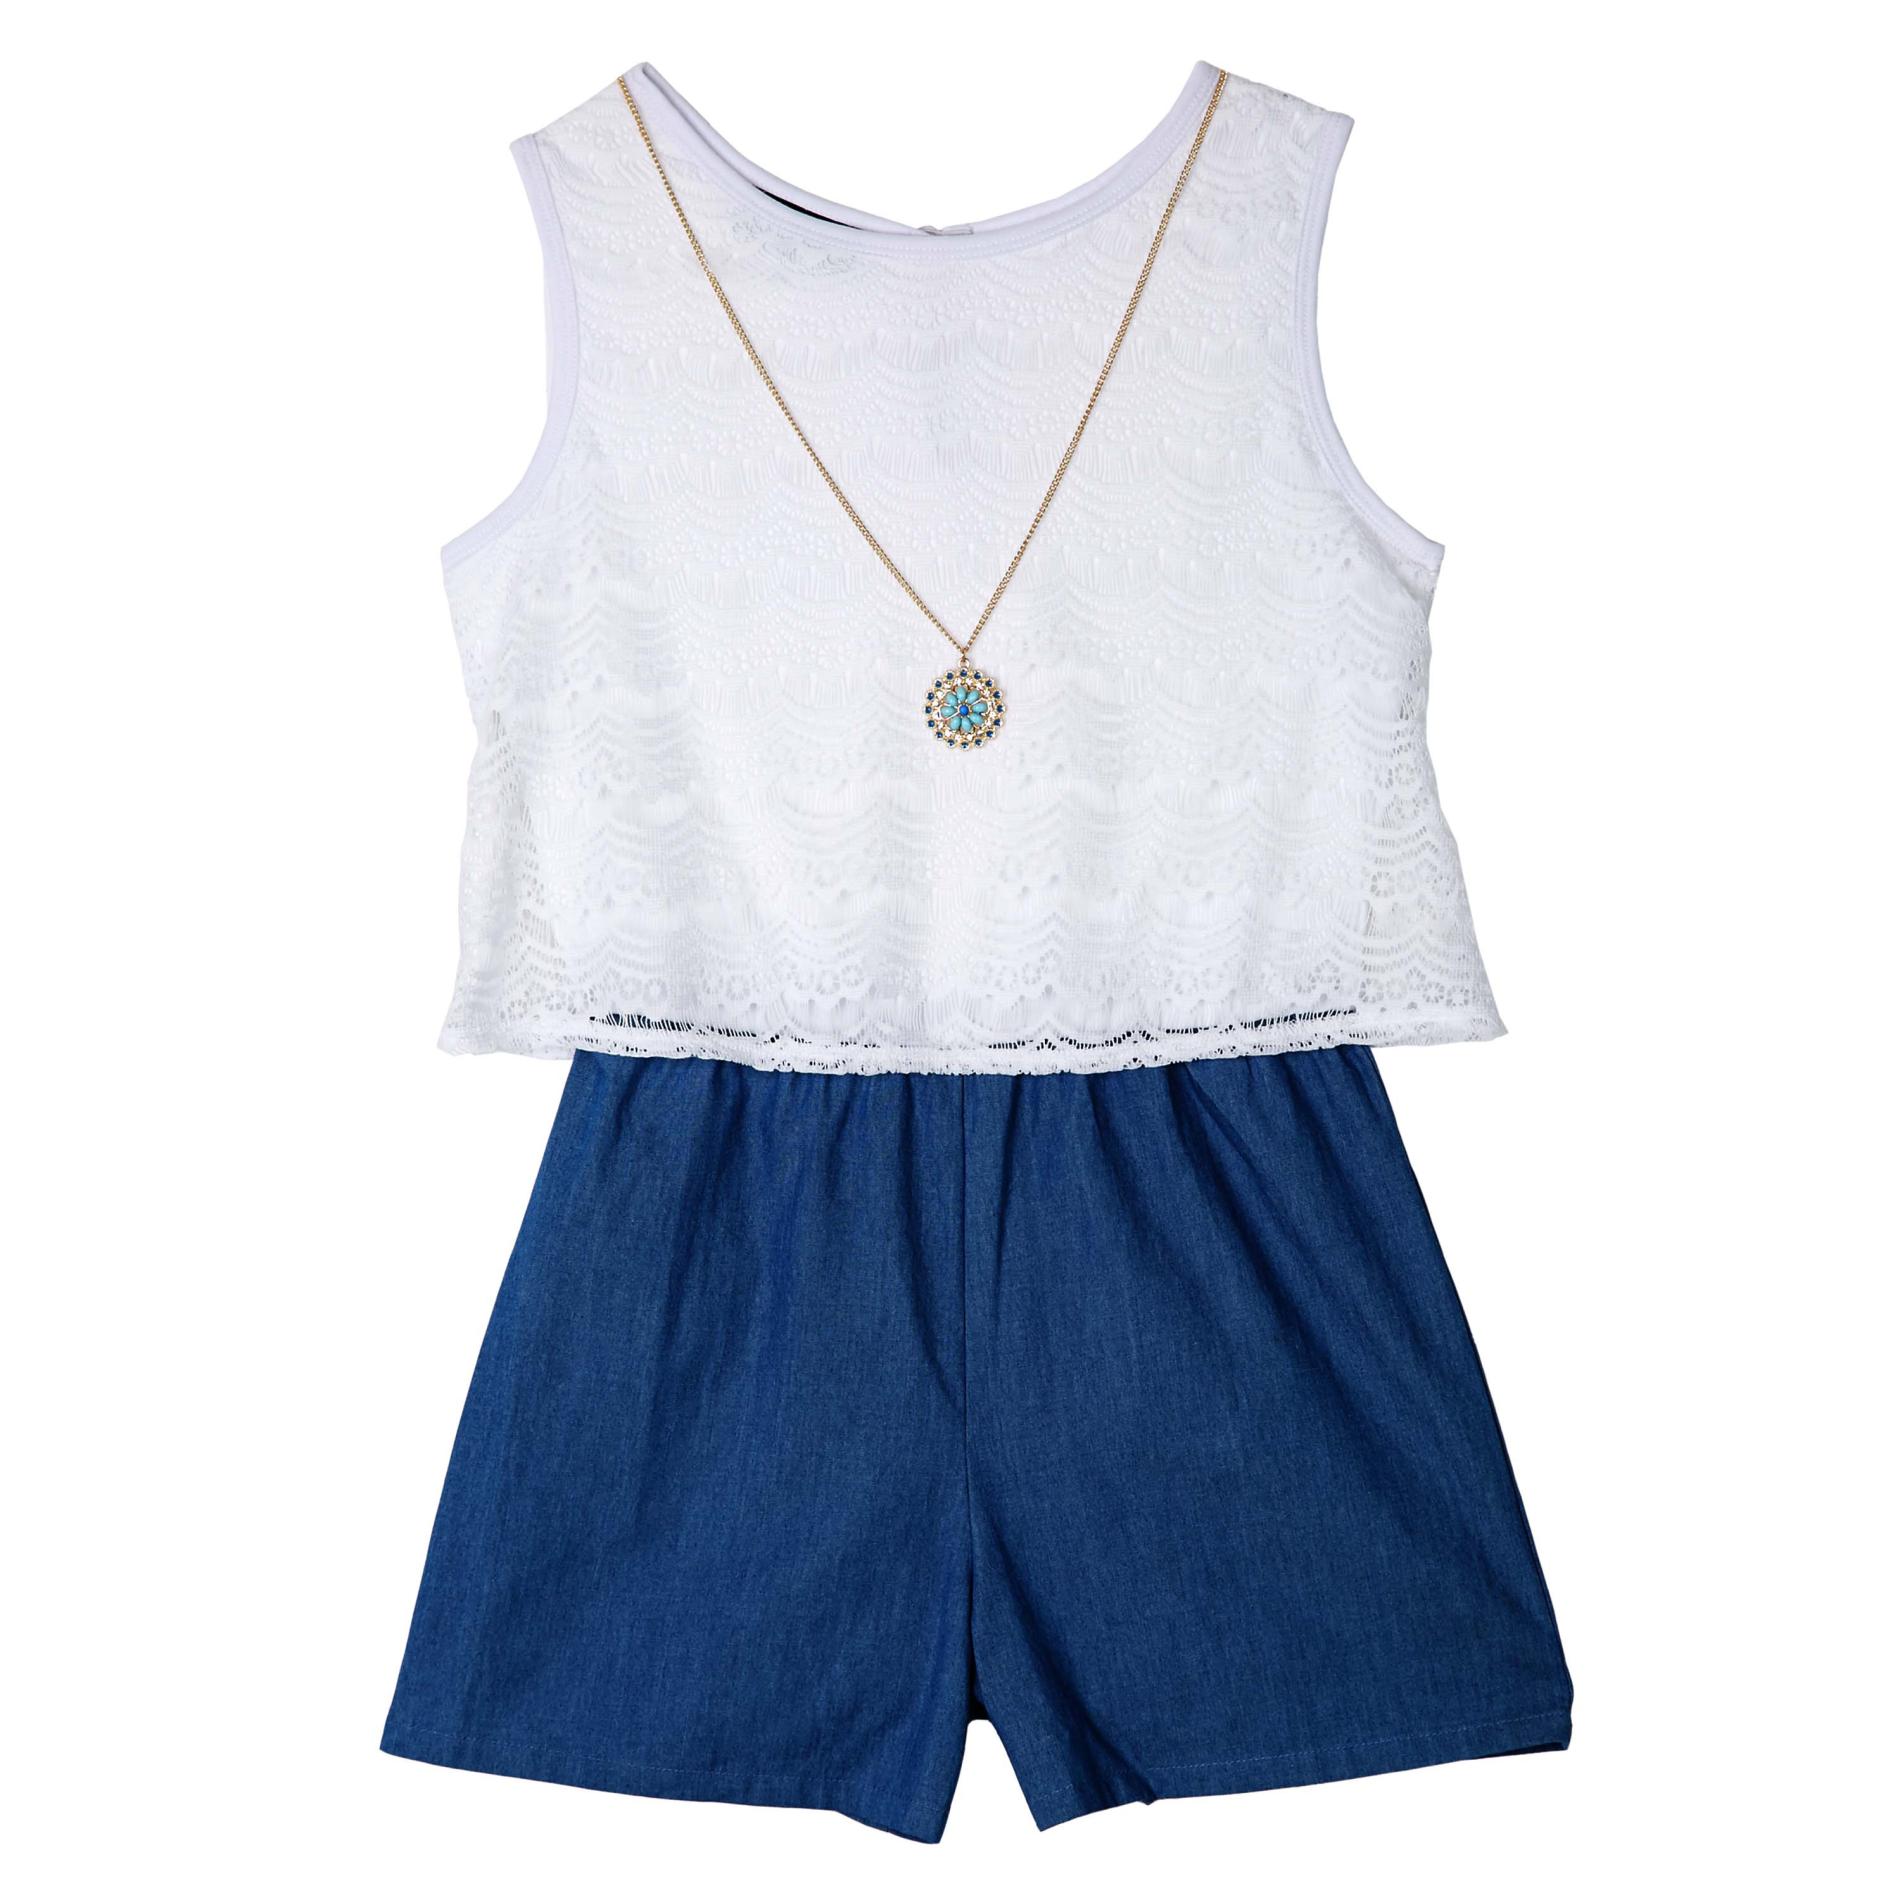 Amy's Closet Girl's Layered-Look Romper & Necklace